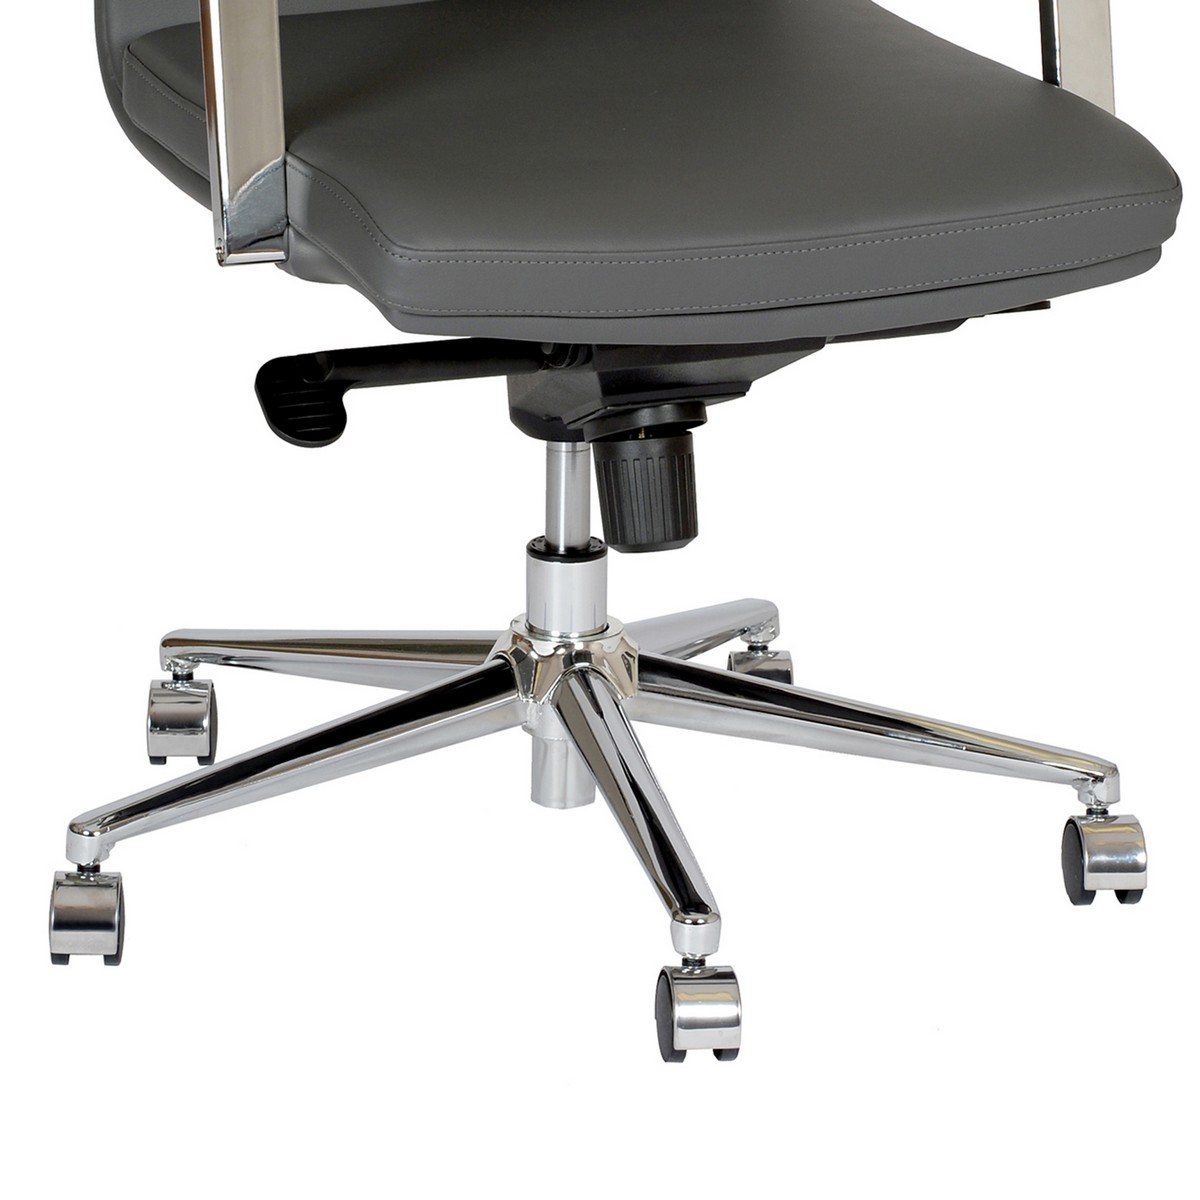 Armen Living Fabian Modern Office Chair In Gray and Chrome